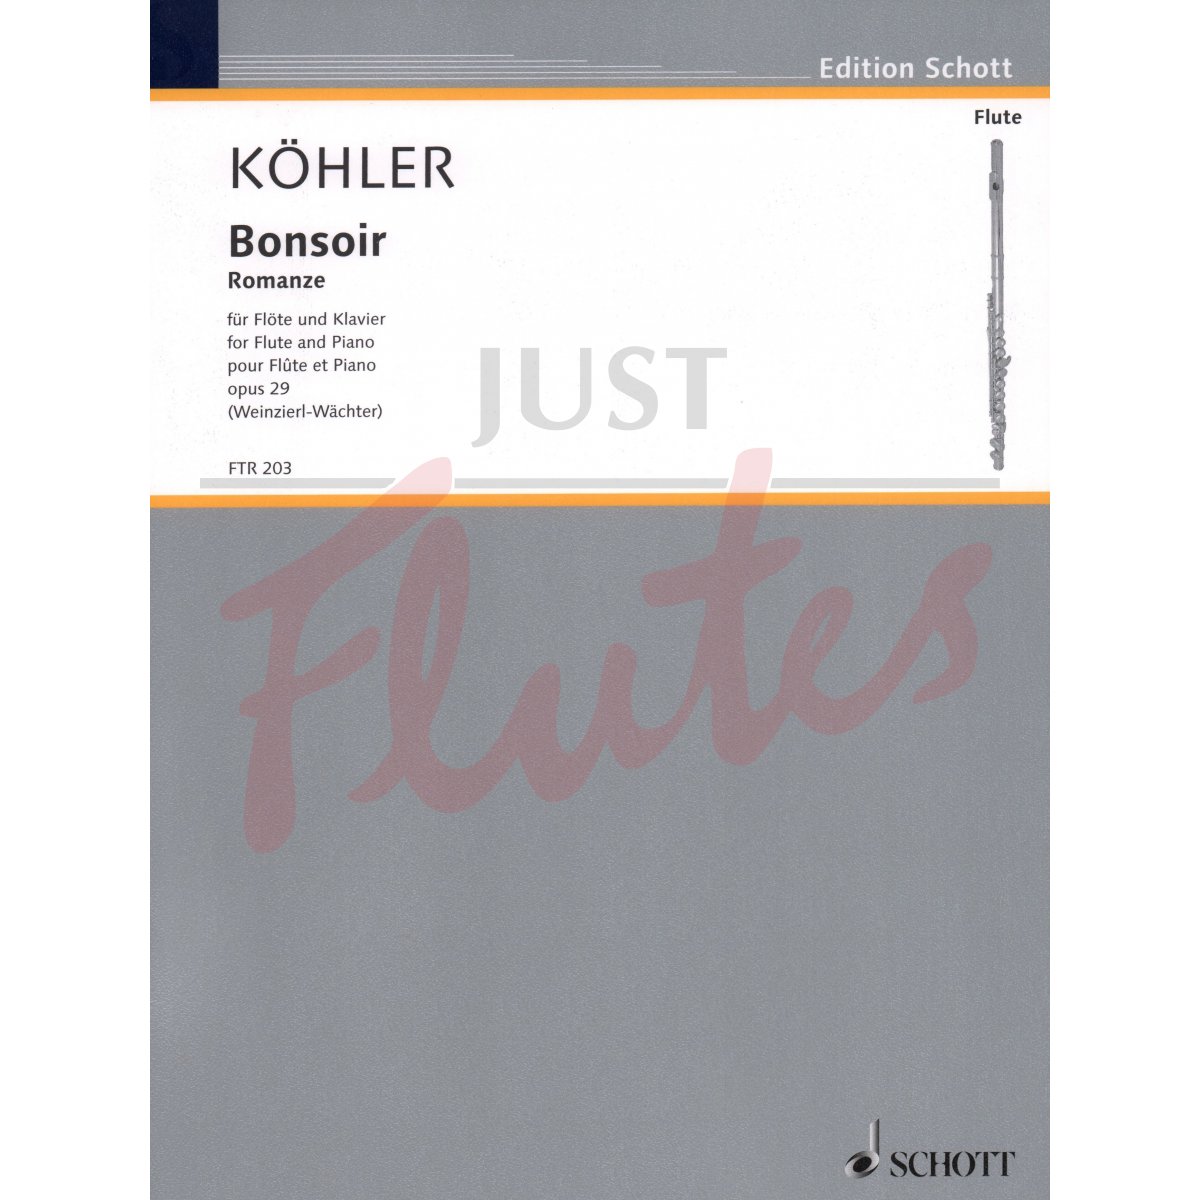 Bonsoir (Romance) for Flute and Piano